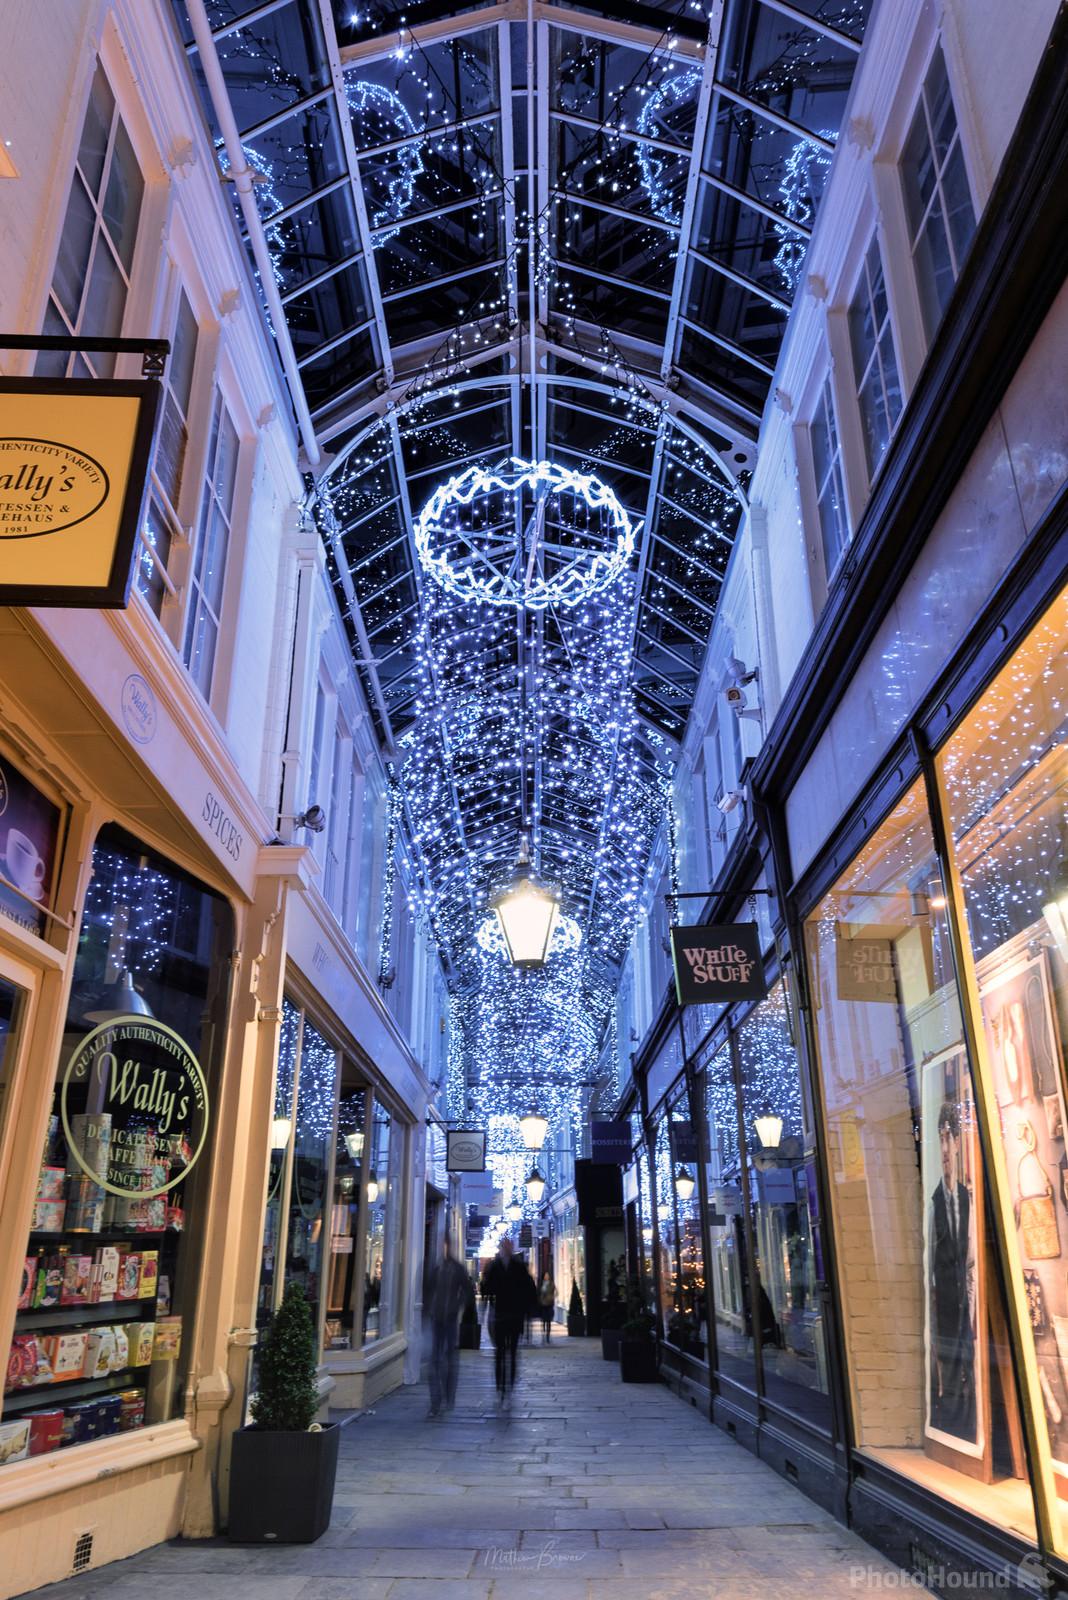 Image of Cardiff at Christmas by Mathew Browne